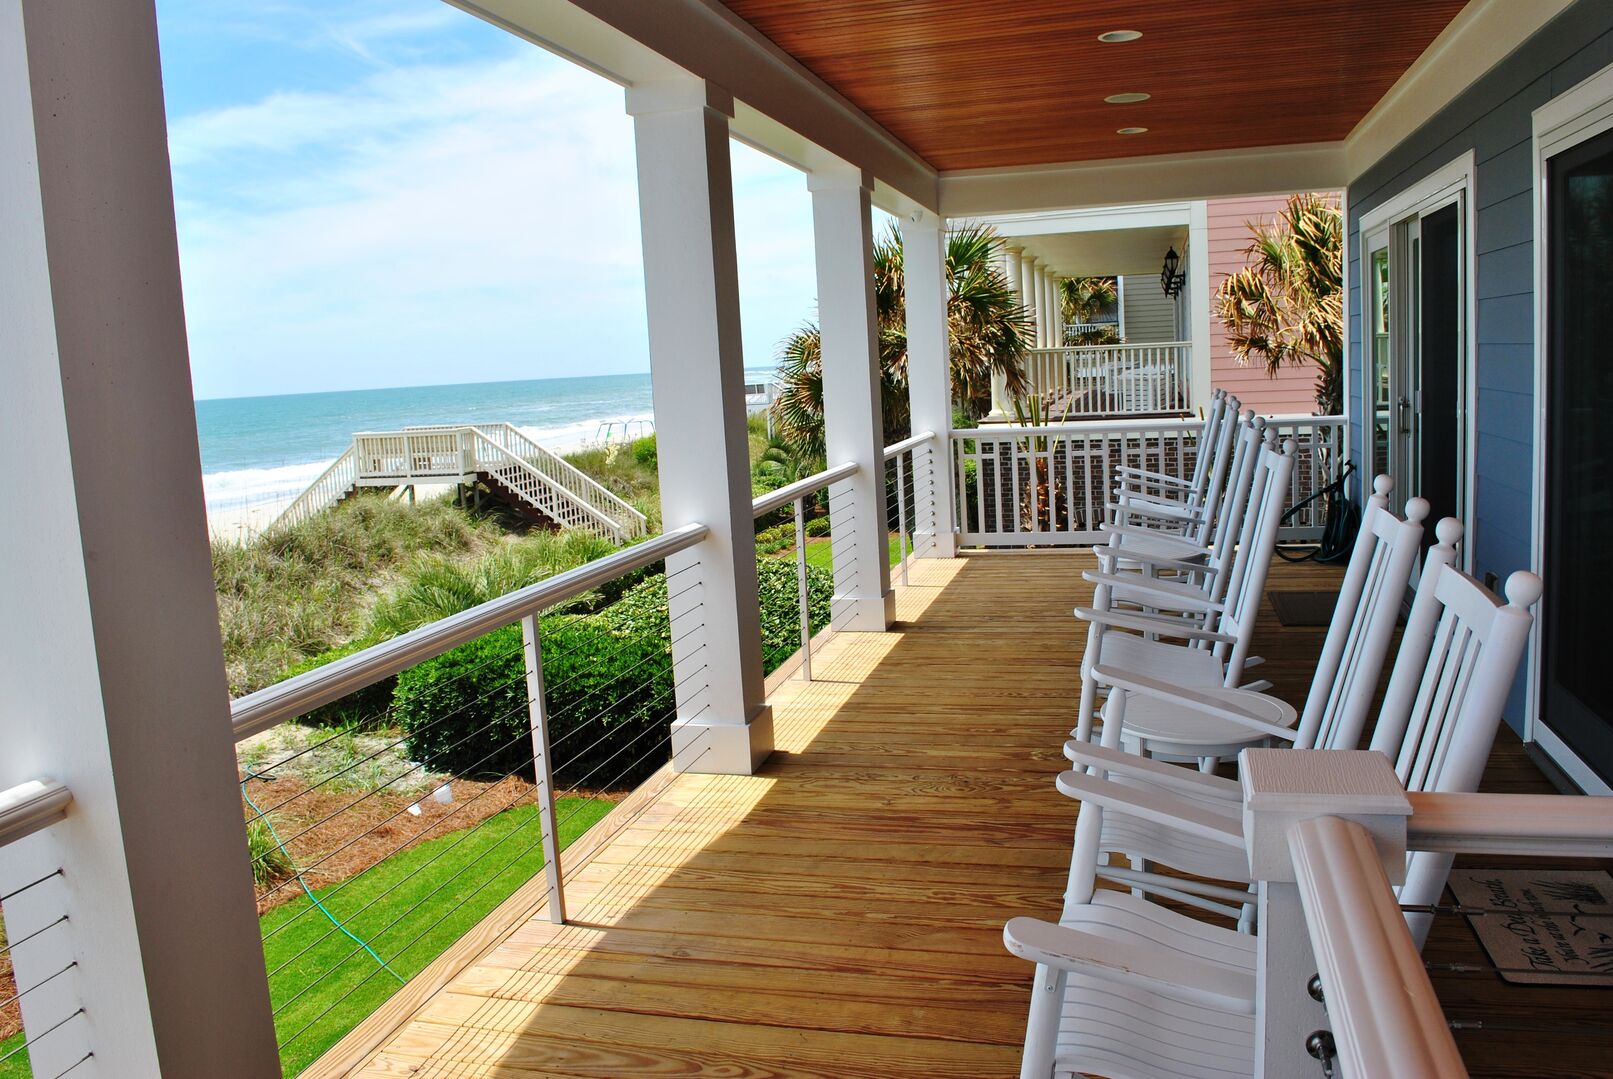 Covered Porch with Ocean View